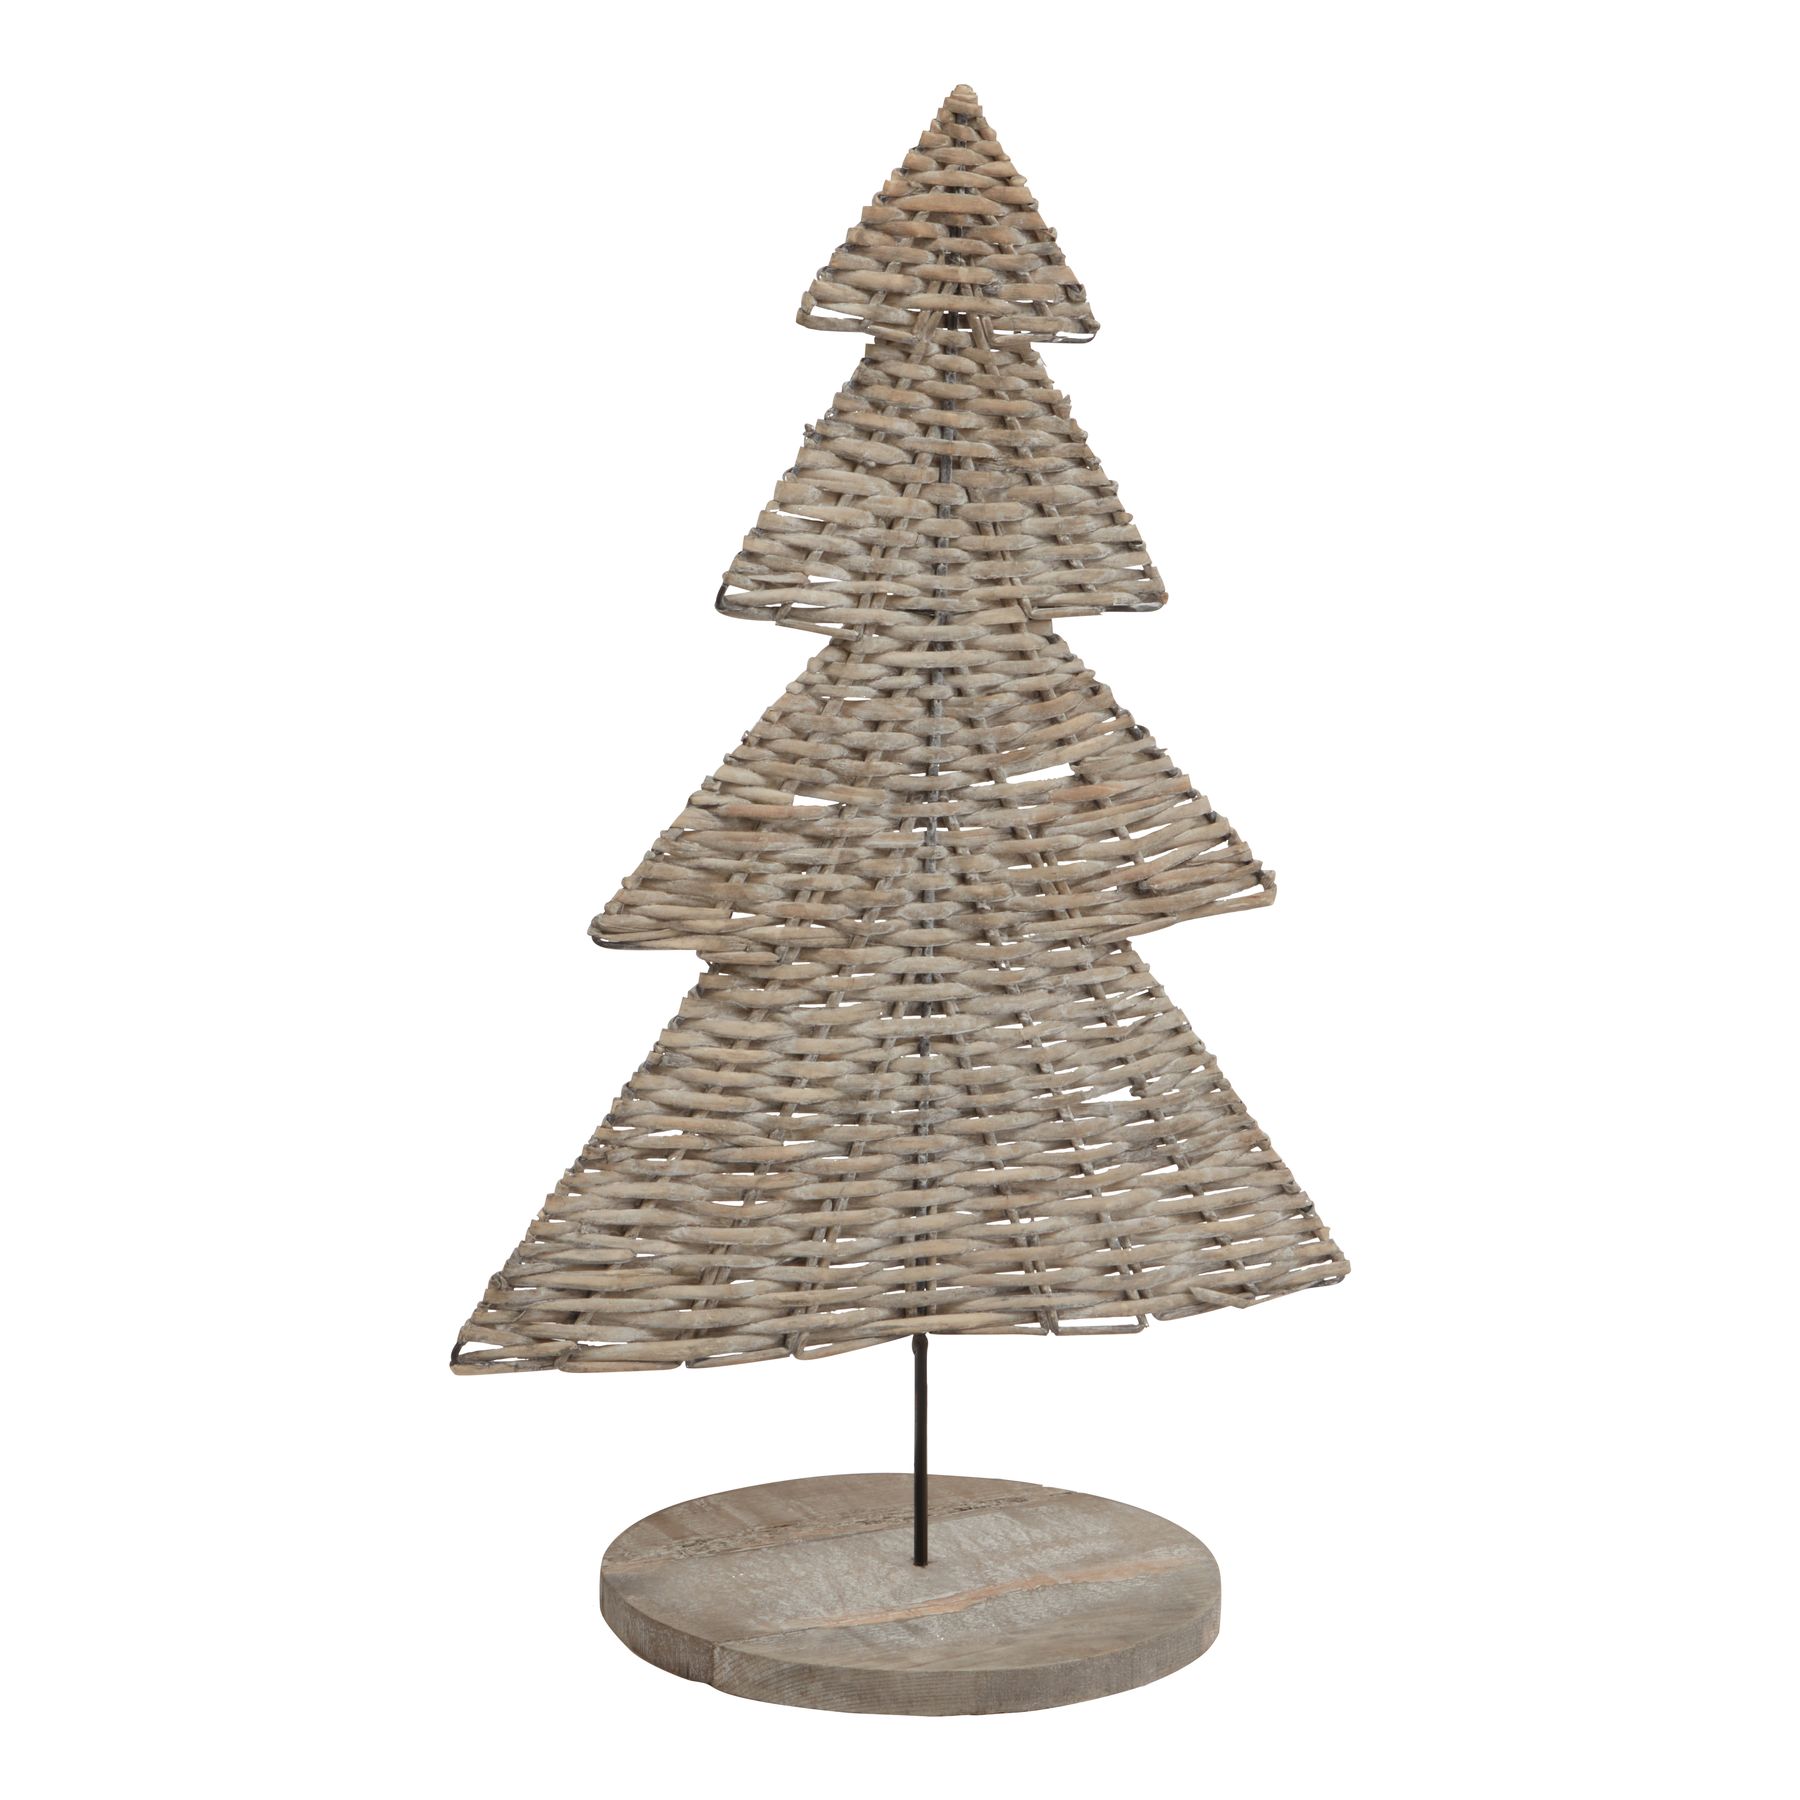 The Noel Collection Large Wicker Tree Ornament - Image 1